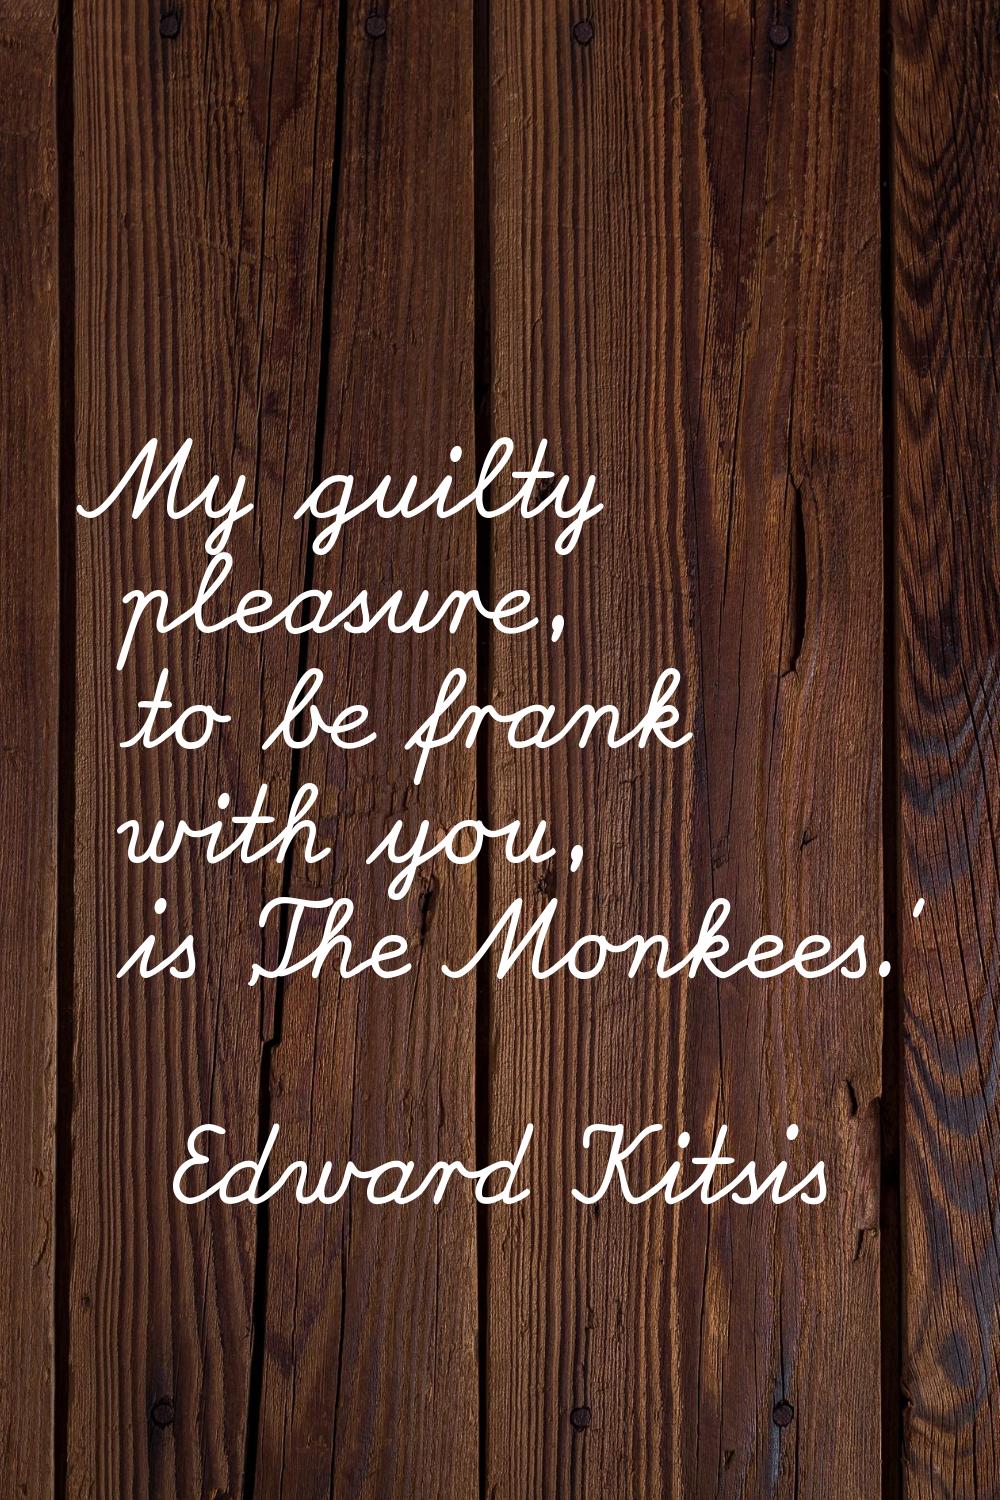 My guilty pleasure, to be frank with you, is 'The Monkees.'